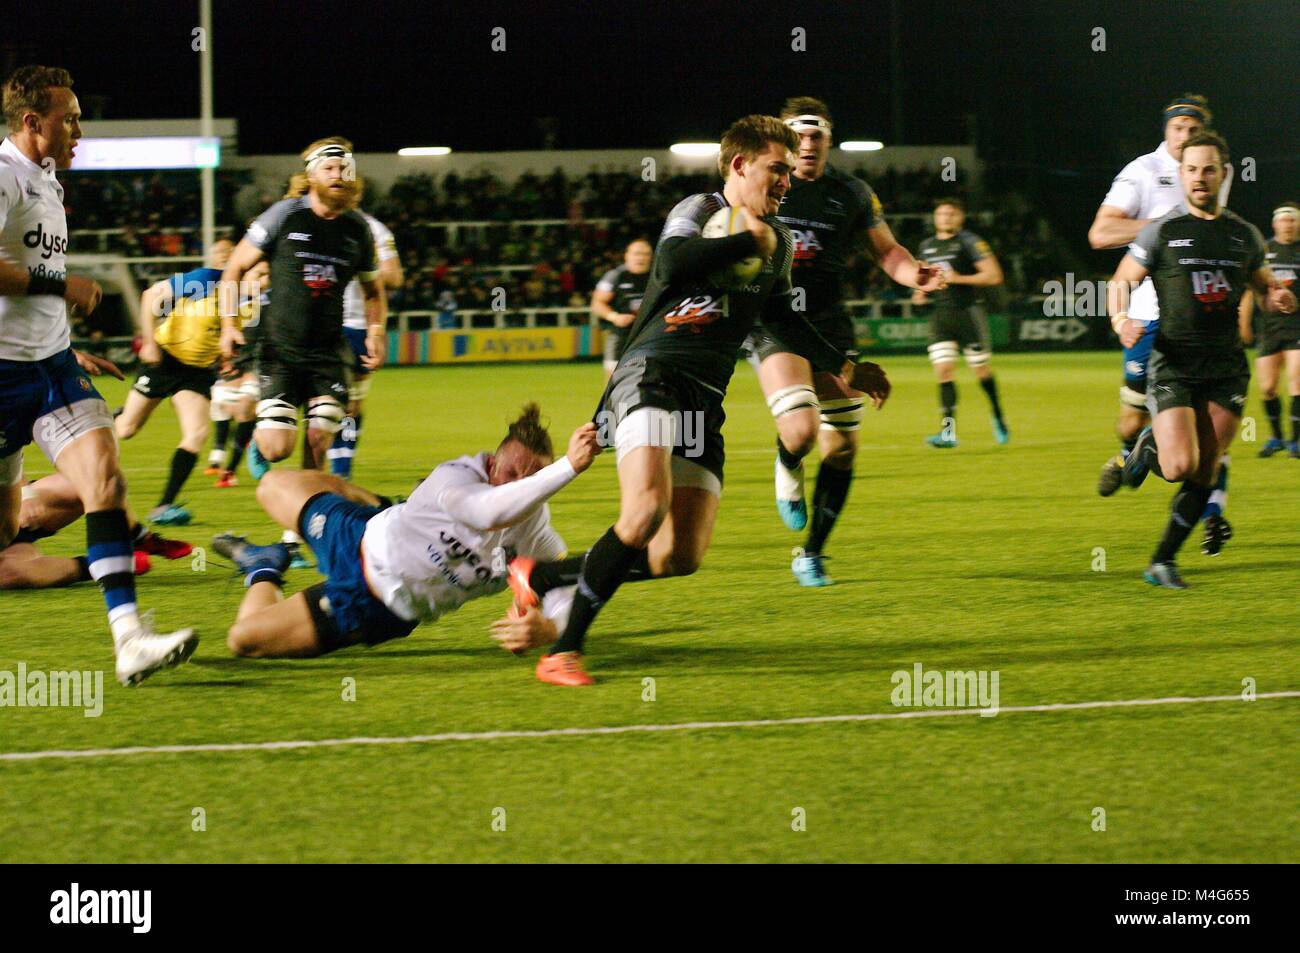 Newcastle upon Tyne, UK. 16th February 2018. Toby Flood scoring a try for Newcastle Falcons against Bath Rugby in the Acviva Premiership. Credit: Colin Edwards/Alamy Live News. Stock Photo